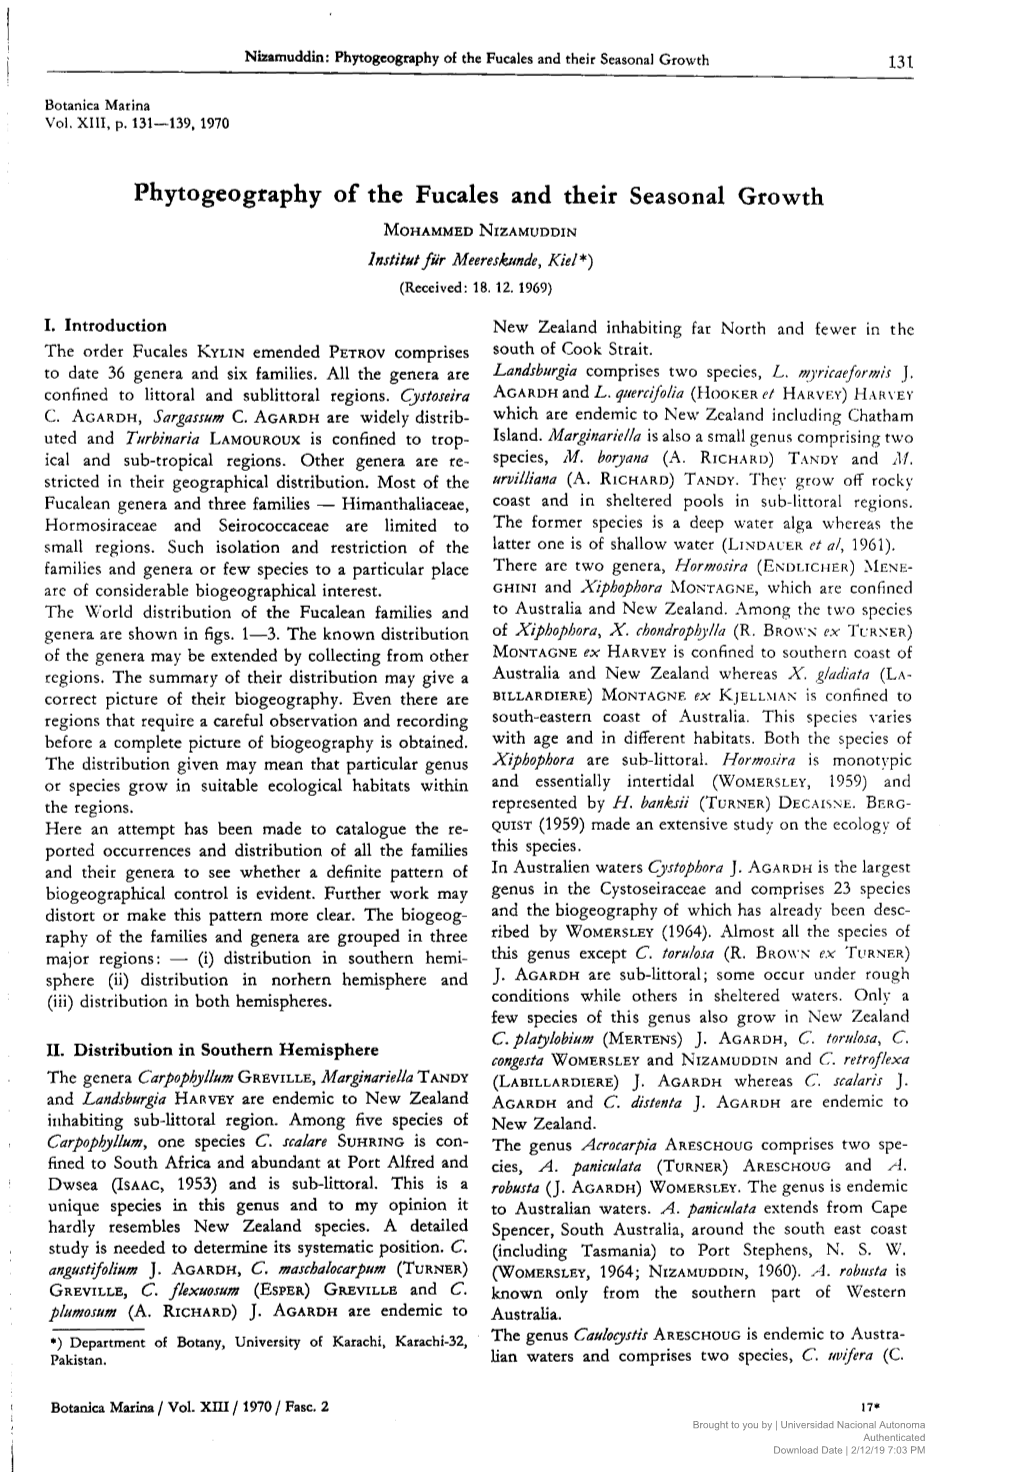 Phytogeography of the Fucales and Their Seasonal Growth MOHAMMED NIZAMUDDIN Institut Für Meereskunde, Kiel*} (Received: 18.12.1969}